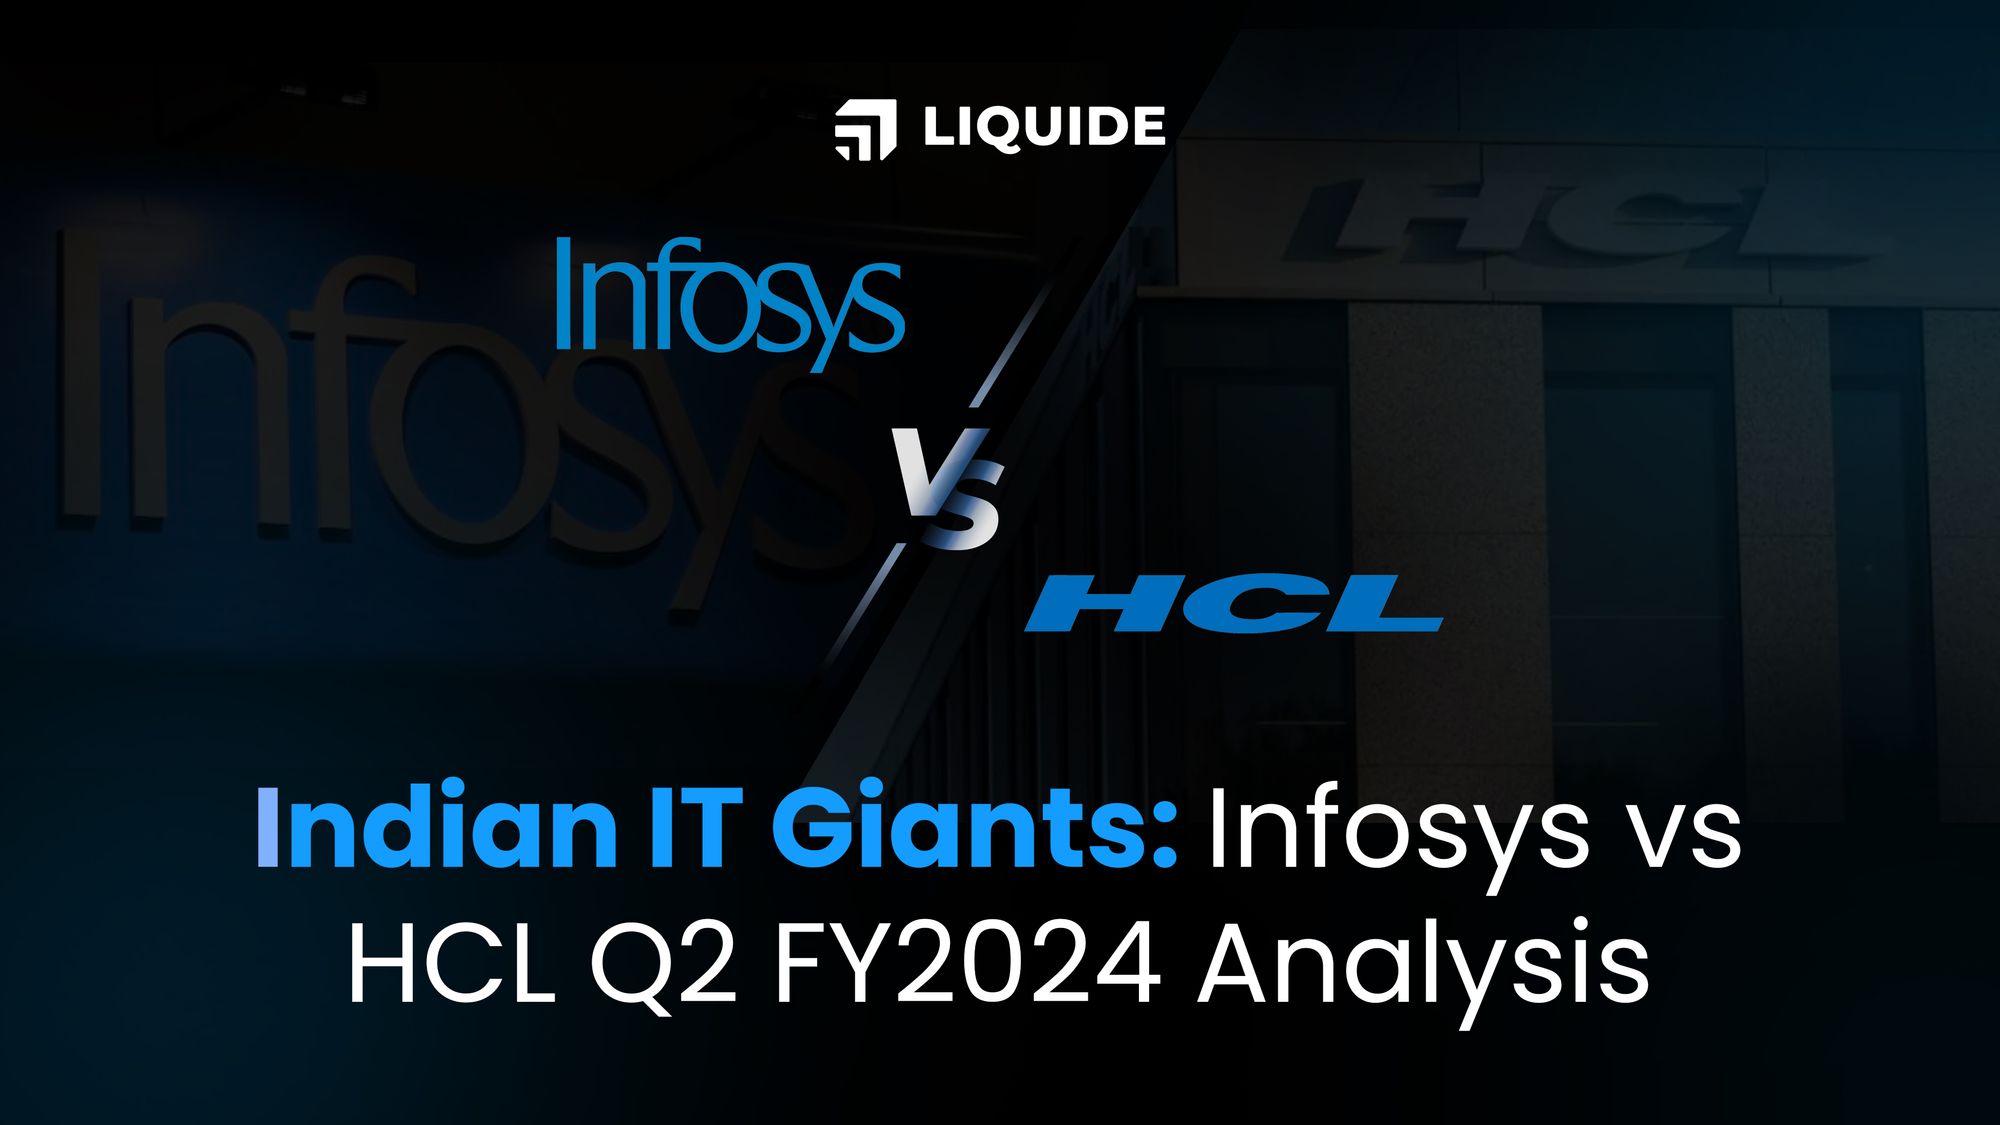 infosys, hcl, infosys q2 results, hcl q2 results, liquide